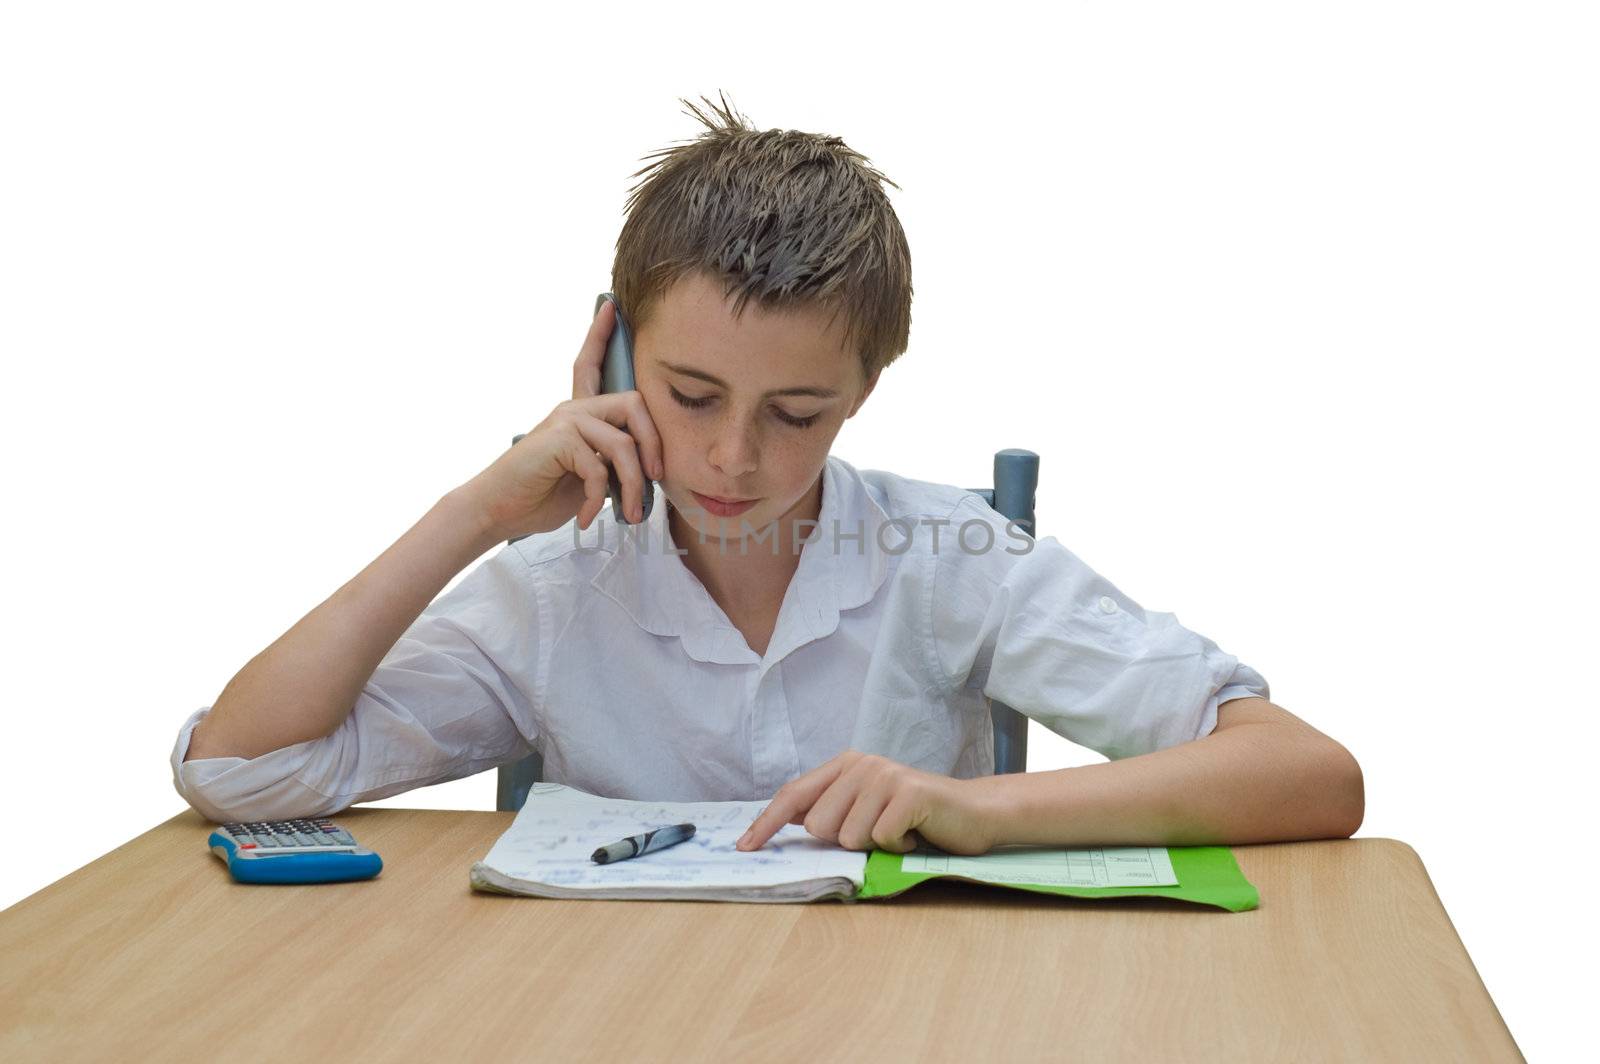 a teen boy studying and getting help from someone on the phone.